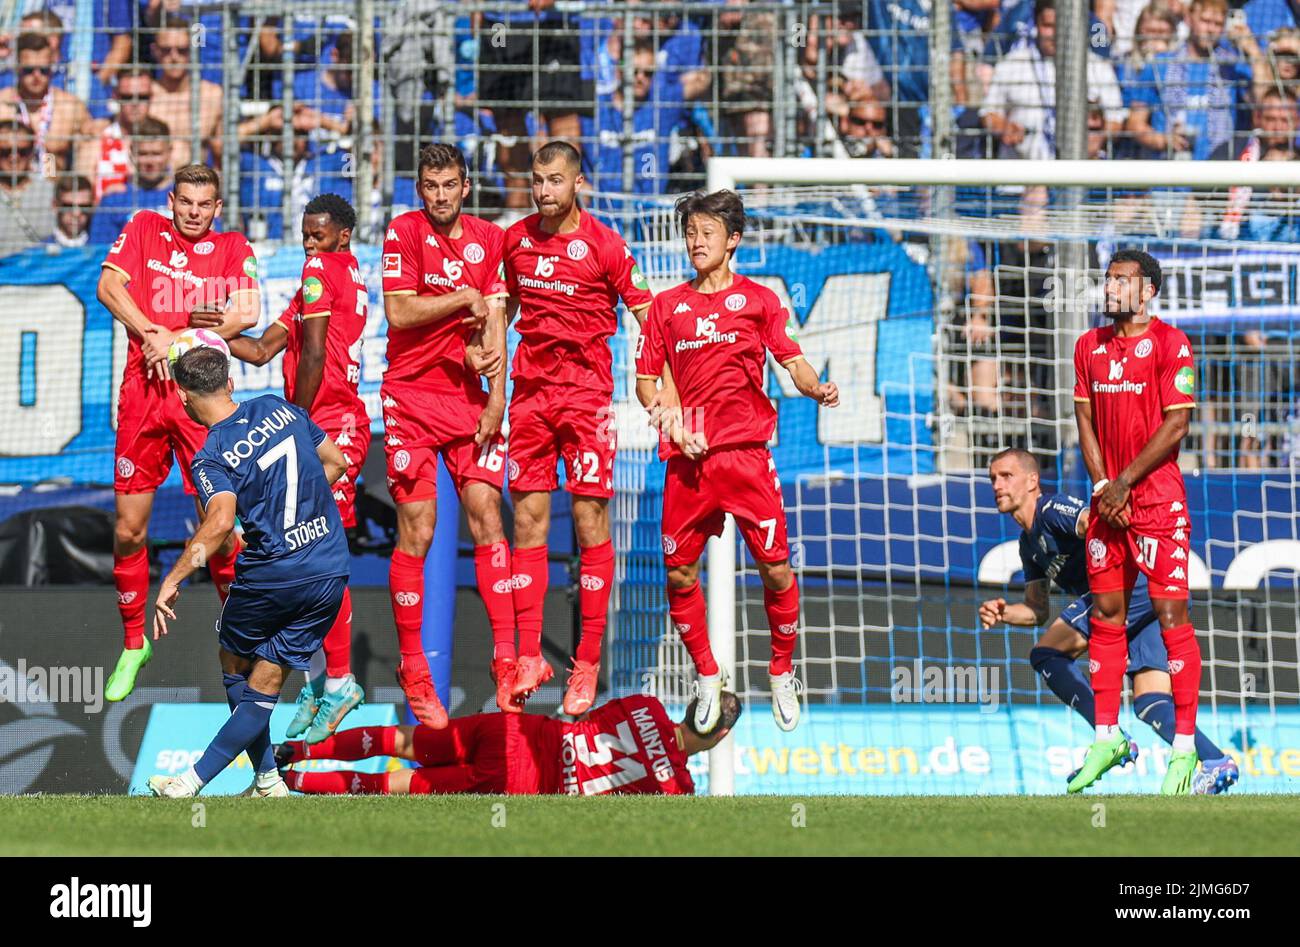 06 August 2022, North Rhine-Westphalia, Bochum: Soccer: Bundesliga, VfL Bochum - FSV Mainz 05, Matchday 1, Vonovia Ruhrstadion.  Kevin Stöger of VfL Bochum shoots a free kick into the wall of the Mainz players. Photo: Tim Rehbein/dpa - IMPORTANT NOTE: In accordance with the requirements of the DFL Deutsche Fußball Liga and the DFB Deutscher Fußball-Bund, it is prohibited to use or have used photographs taken in the stadium and/or of the match in the form of sequence pictures and/or video-like photo series. Stock Photo